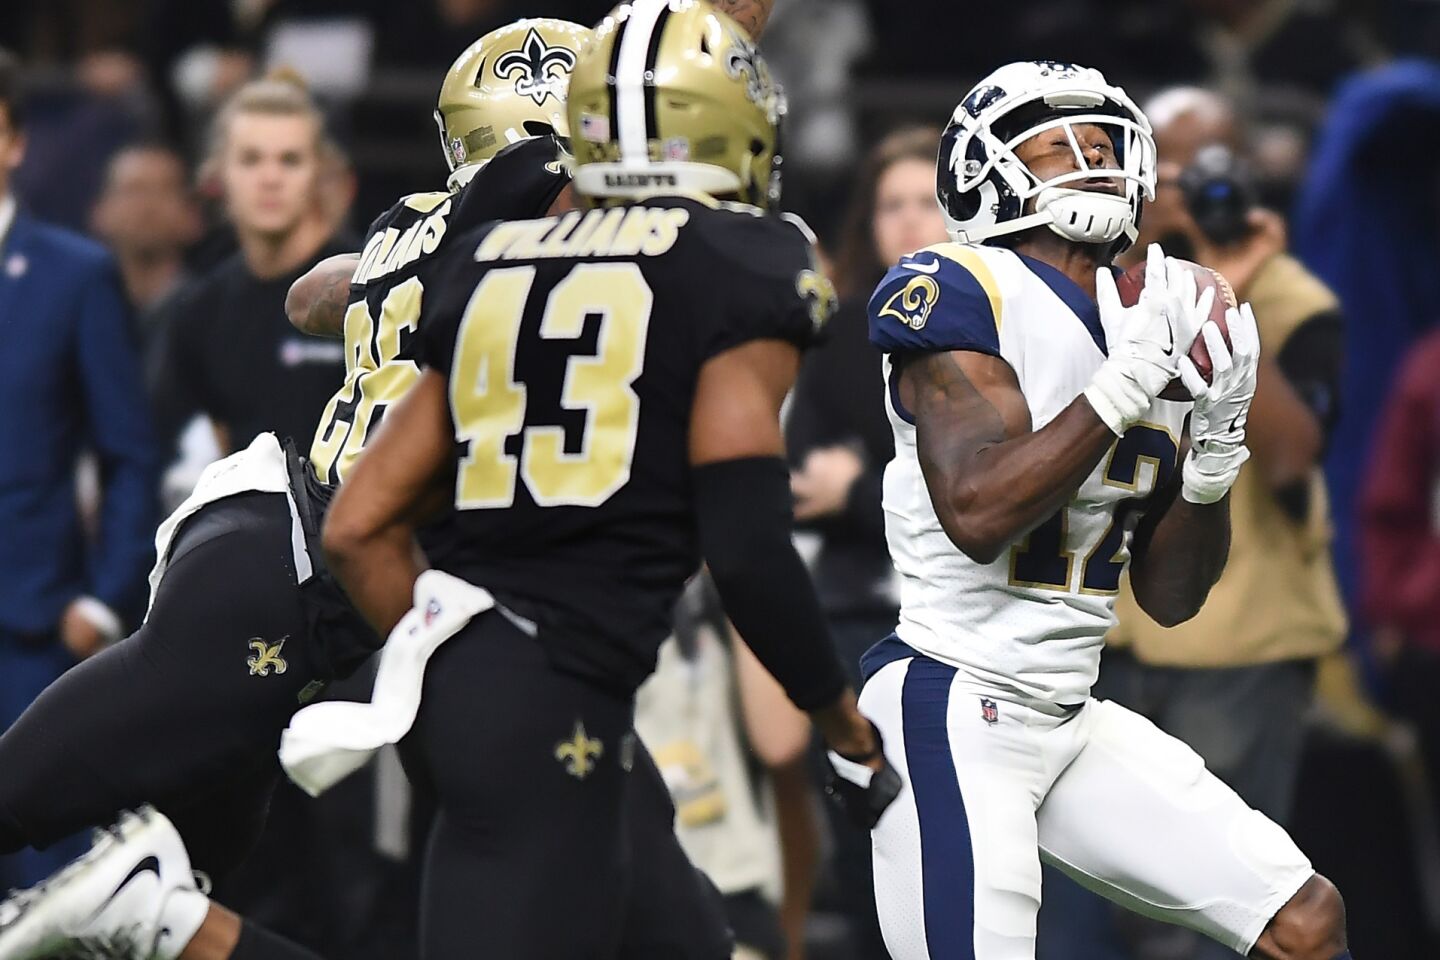 Rams receiver Brandin Cooks makes a catch against the Saints defense to set up a touchdown late in the second quarter in the NFC Championship at the Superdome on Jan. 20.